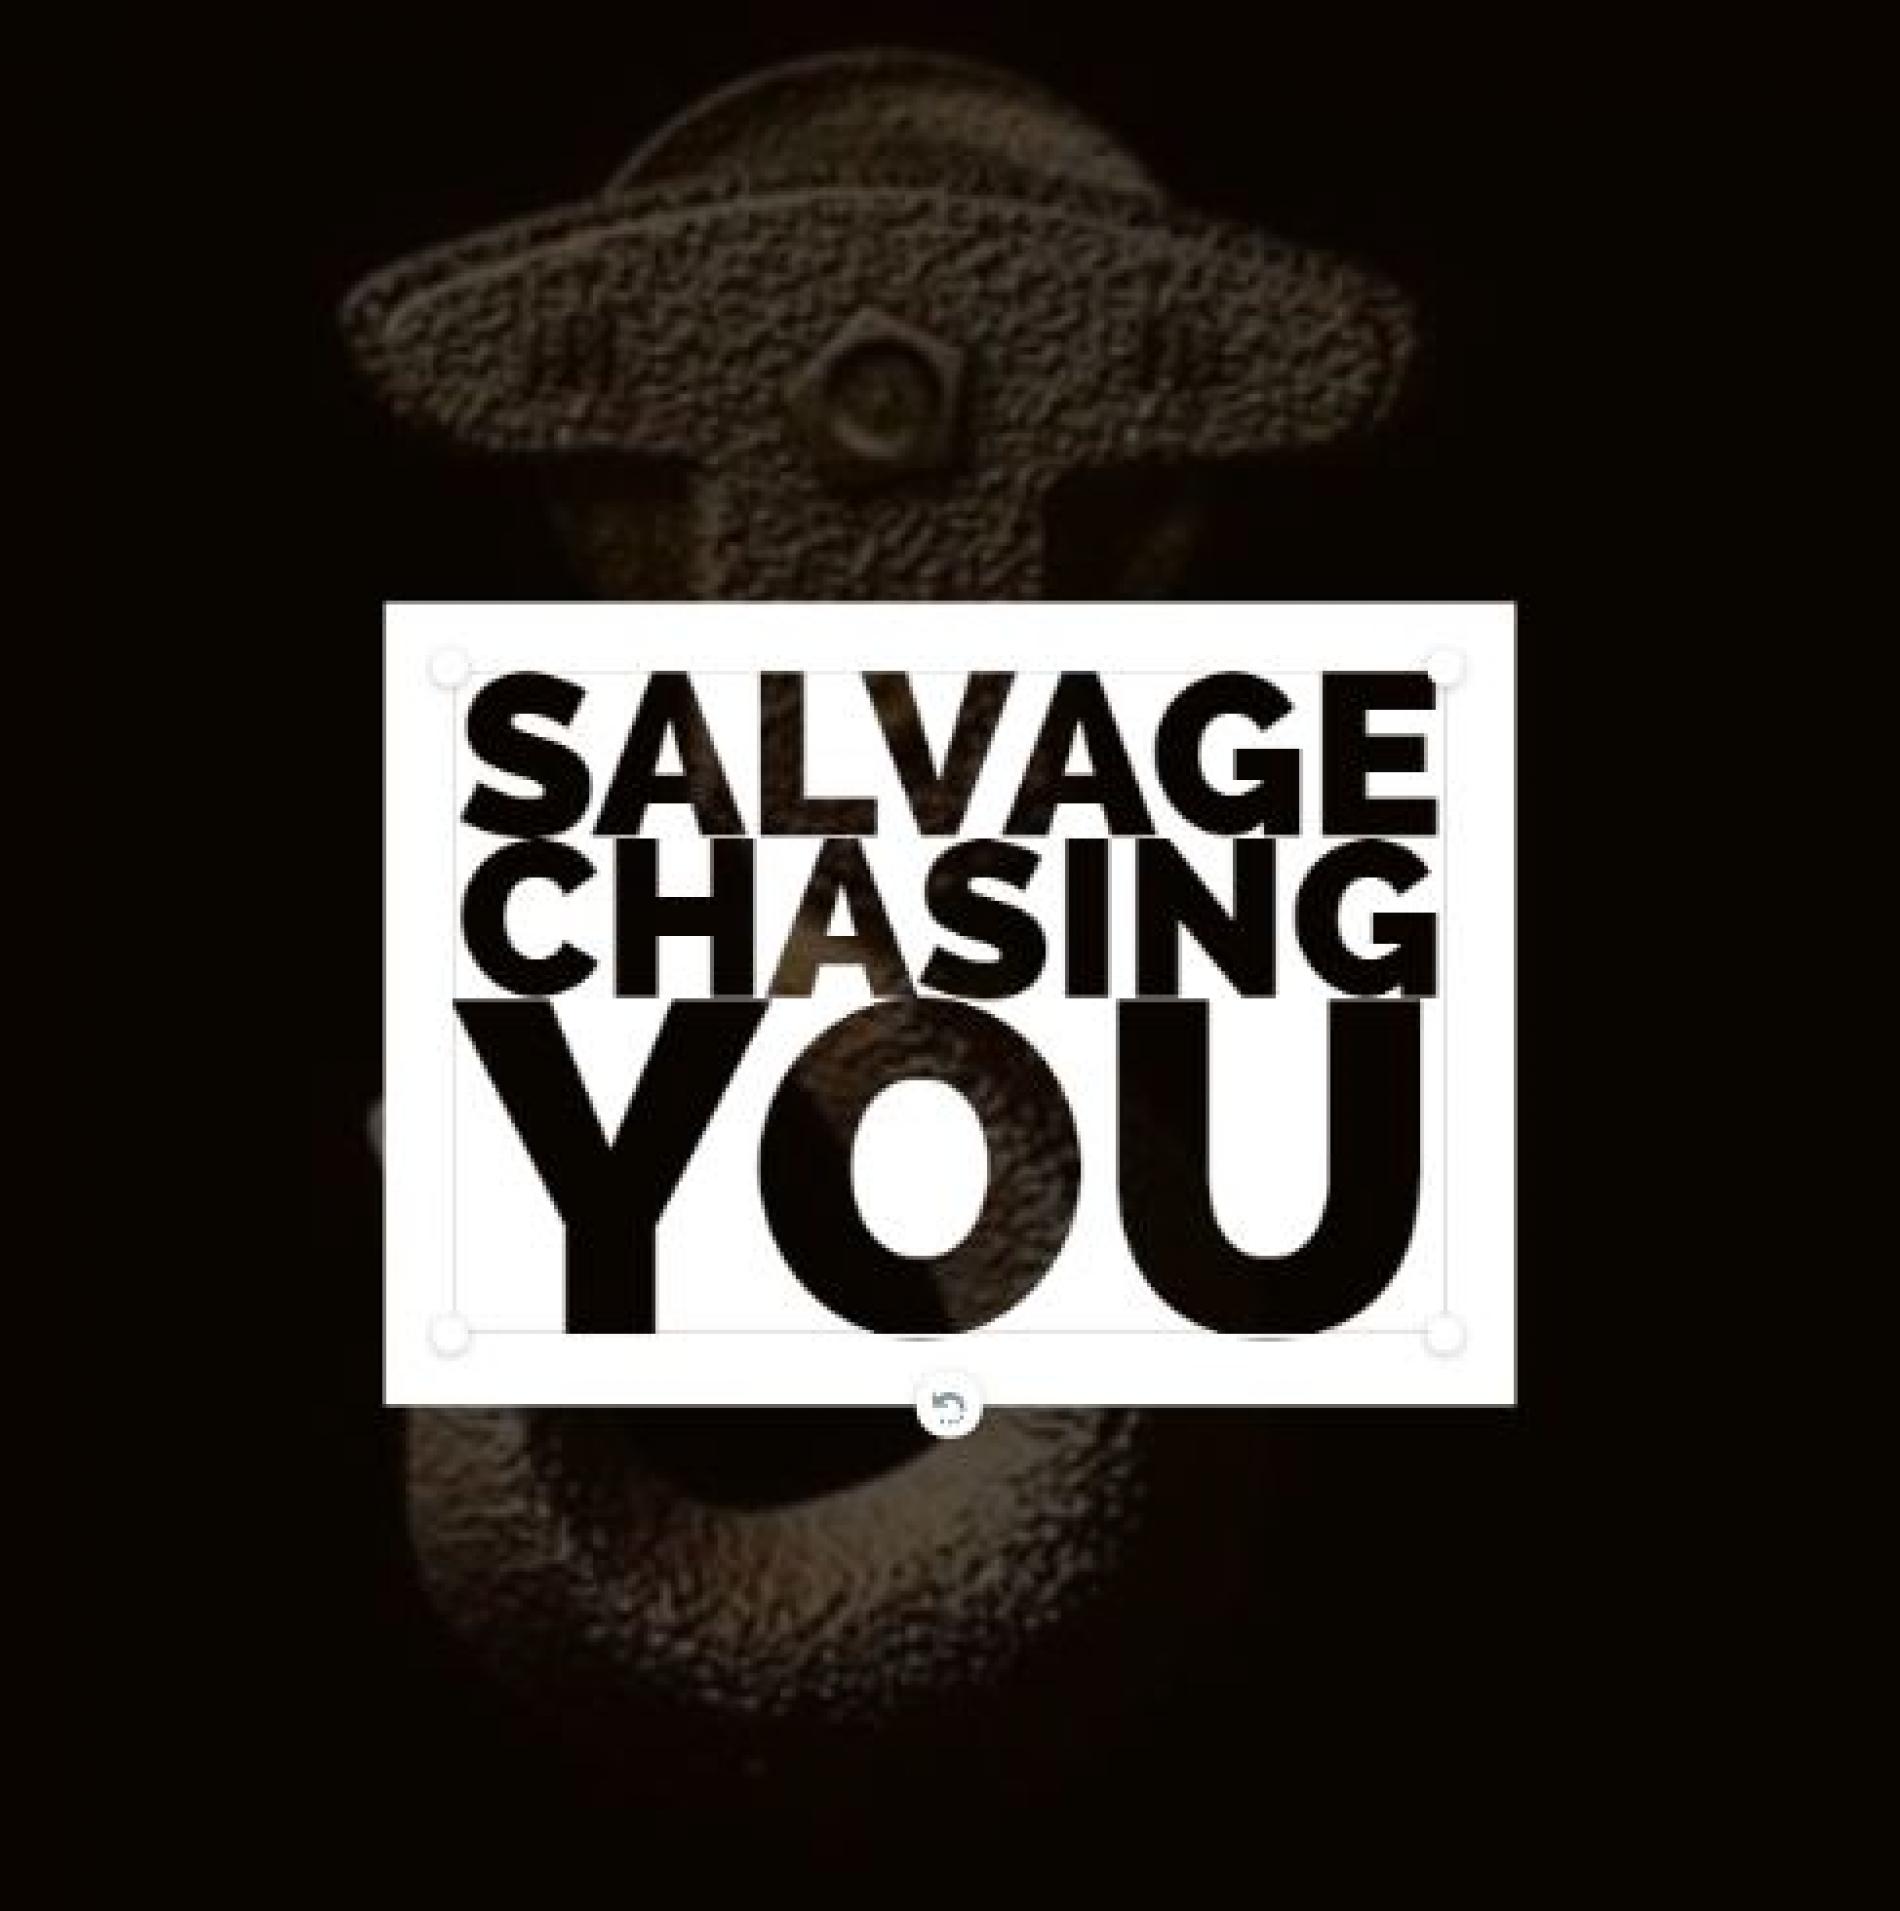 Salvage – Chasing You (To Chris Cornell) – Live recording